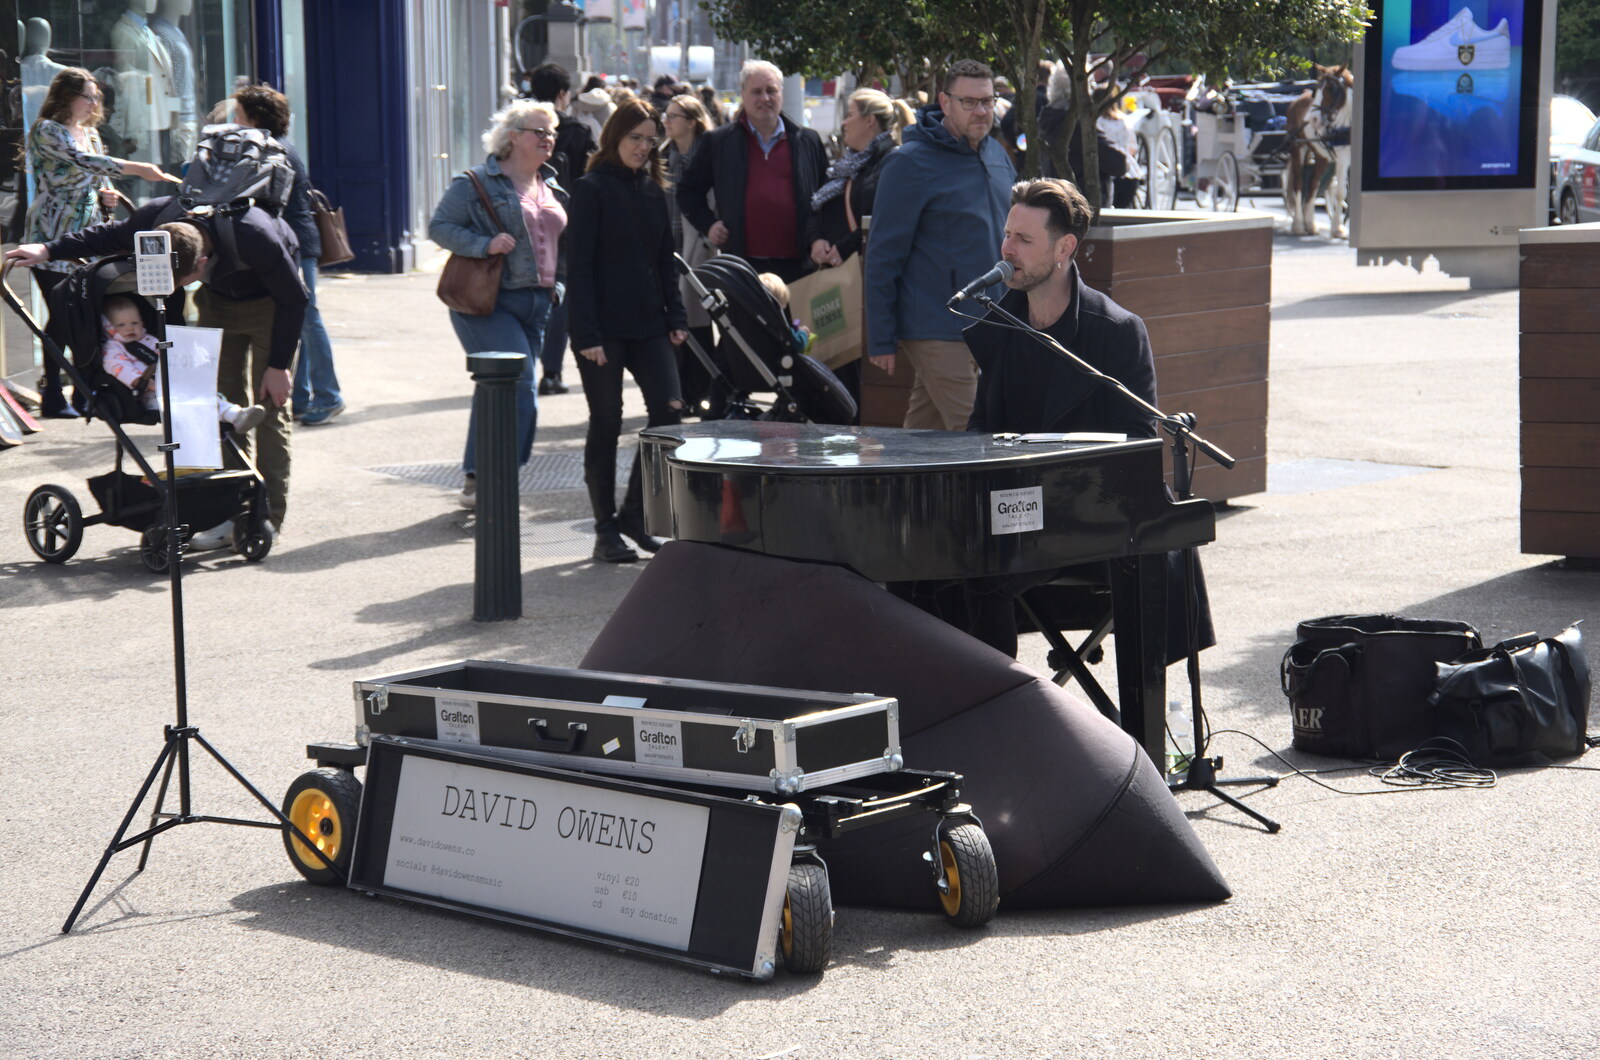 Blackrock North and South, Louth and County Dublin, Ireland - 23rd April 2022: David Owens - busker - on Grafton Street